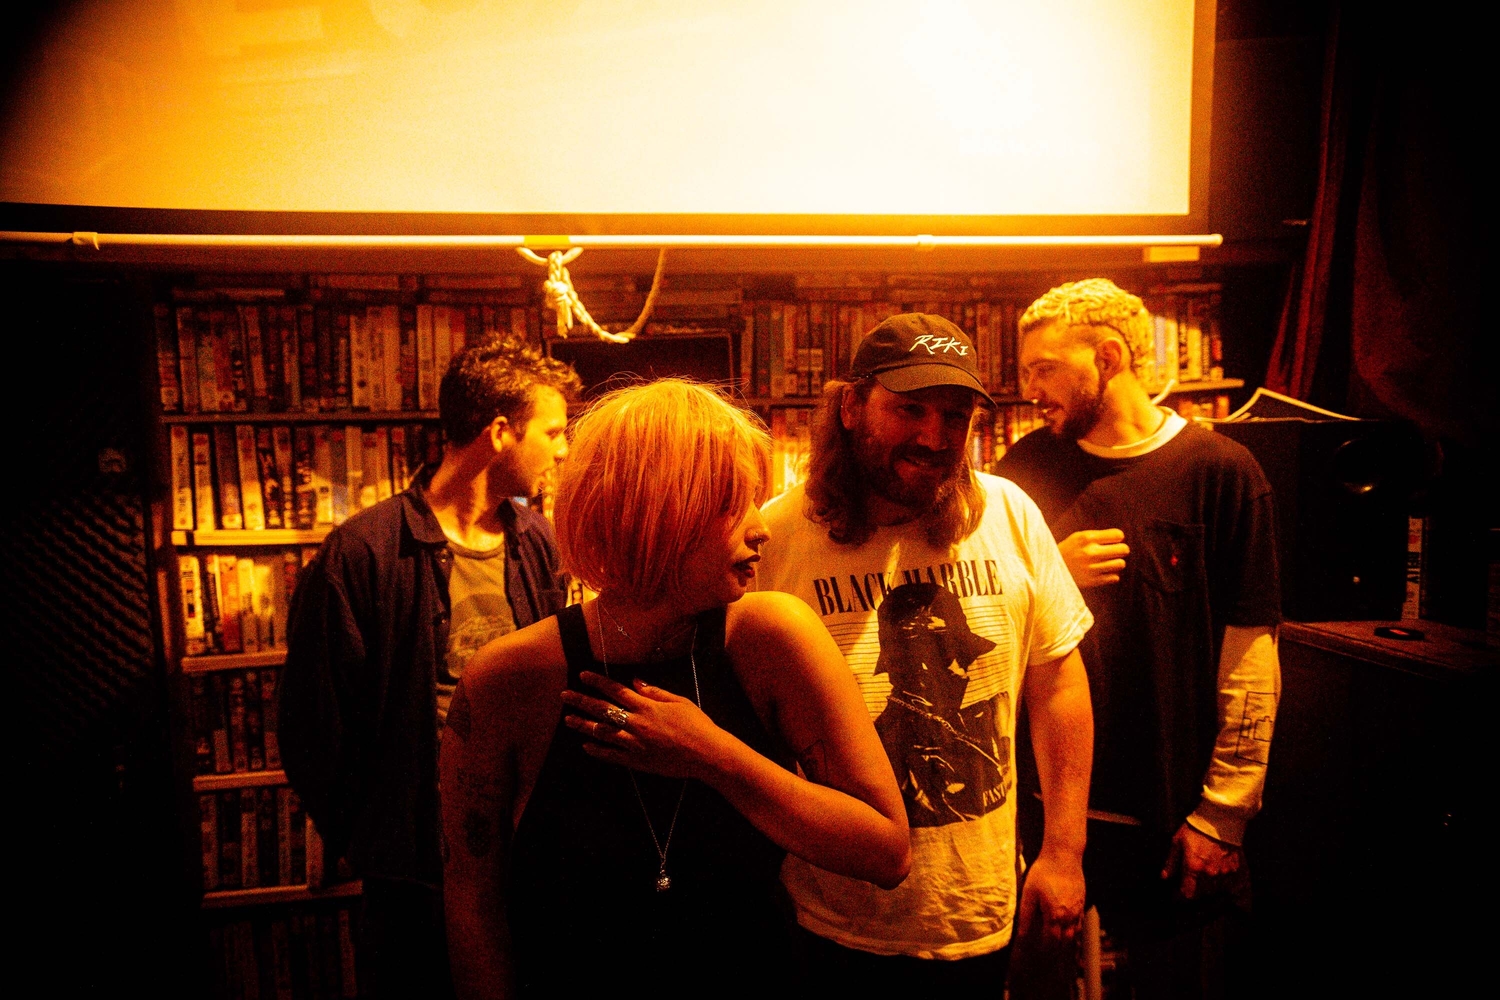 Mandy, Indiana: ﻿﻿“The day we write an album that’s expected is the day this band is dead.”